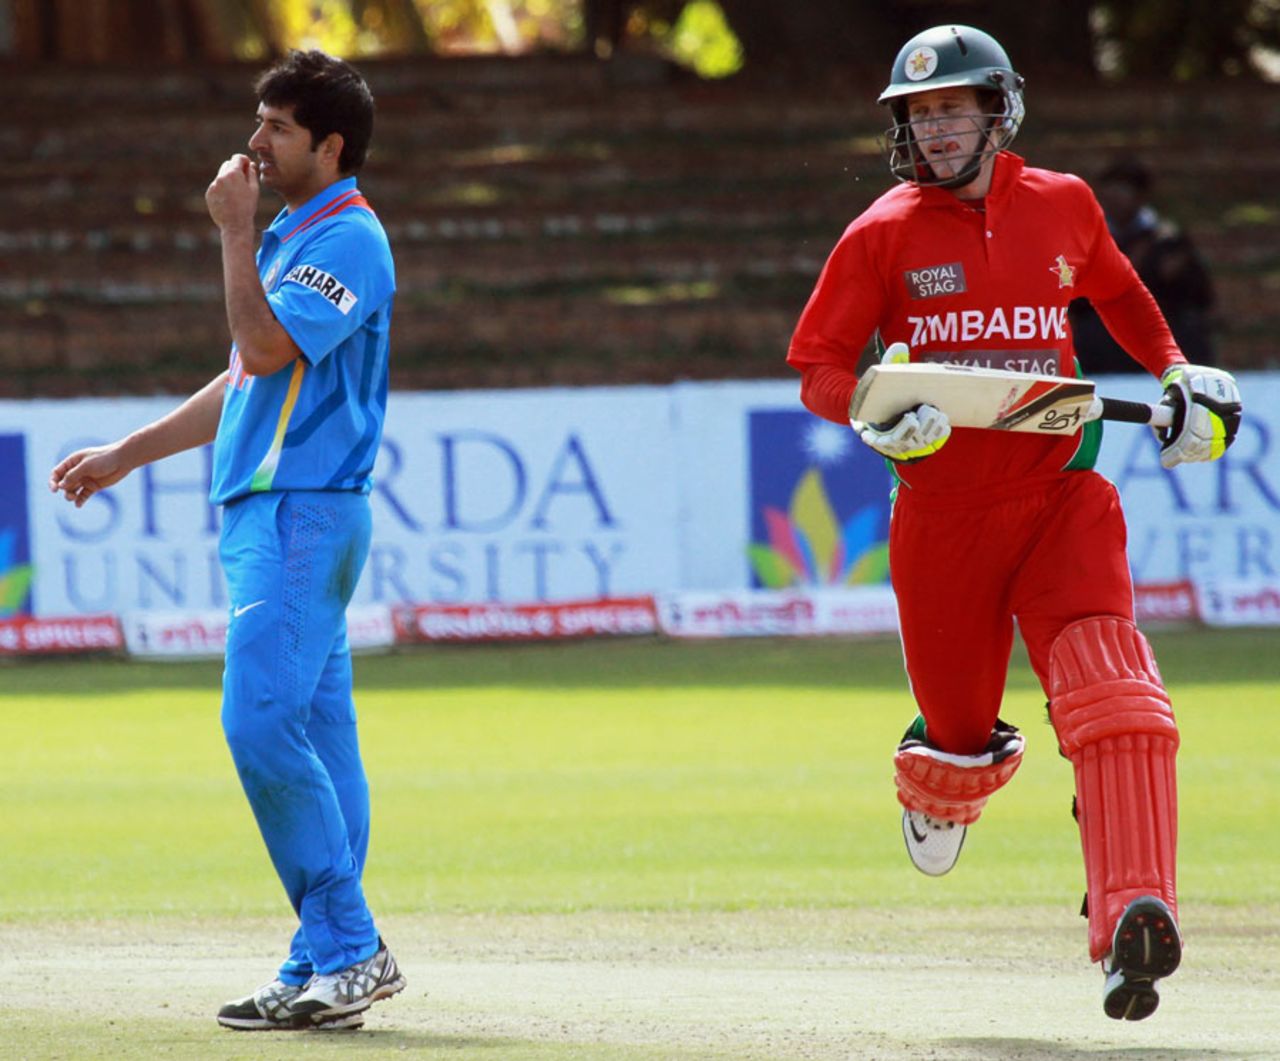 Malcolm Waller completes a run as Mohit Sharma looks on, Zimbabwe v India, 4th ODI, Bulawayo, August 1, 2013